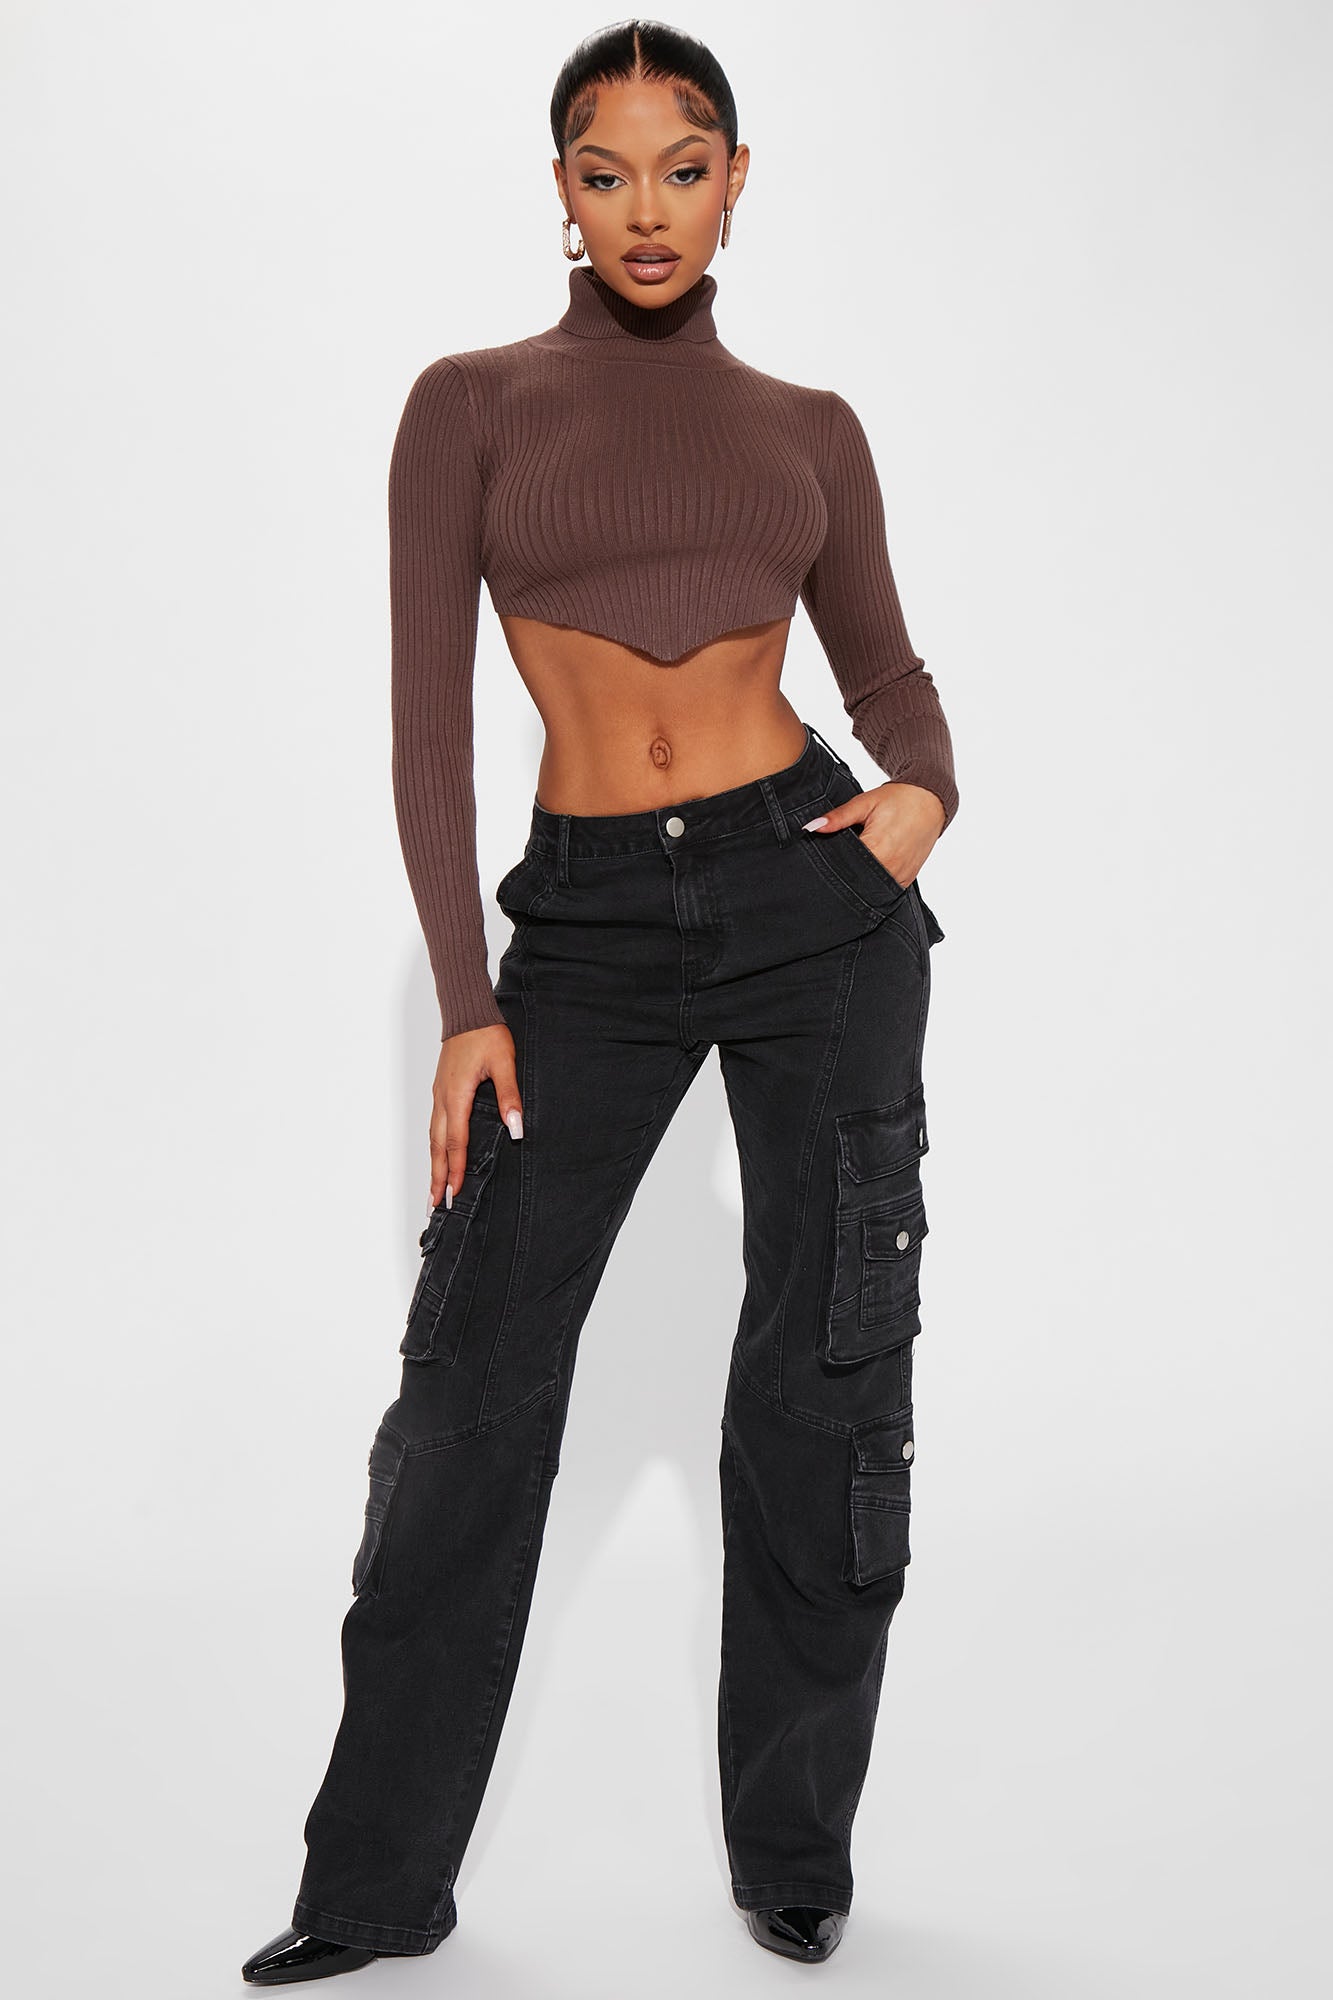 Black Cami Top & Cropped High Rise Jeans - LivvyLand